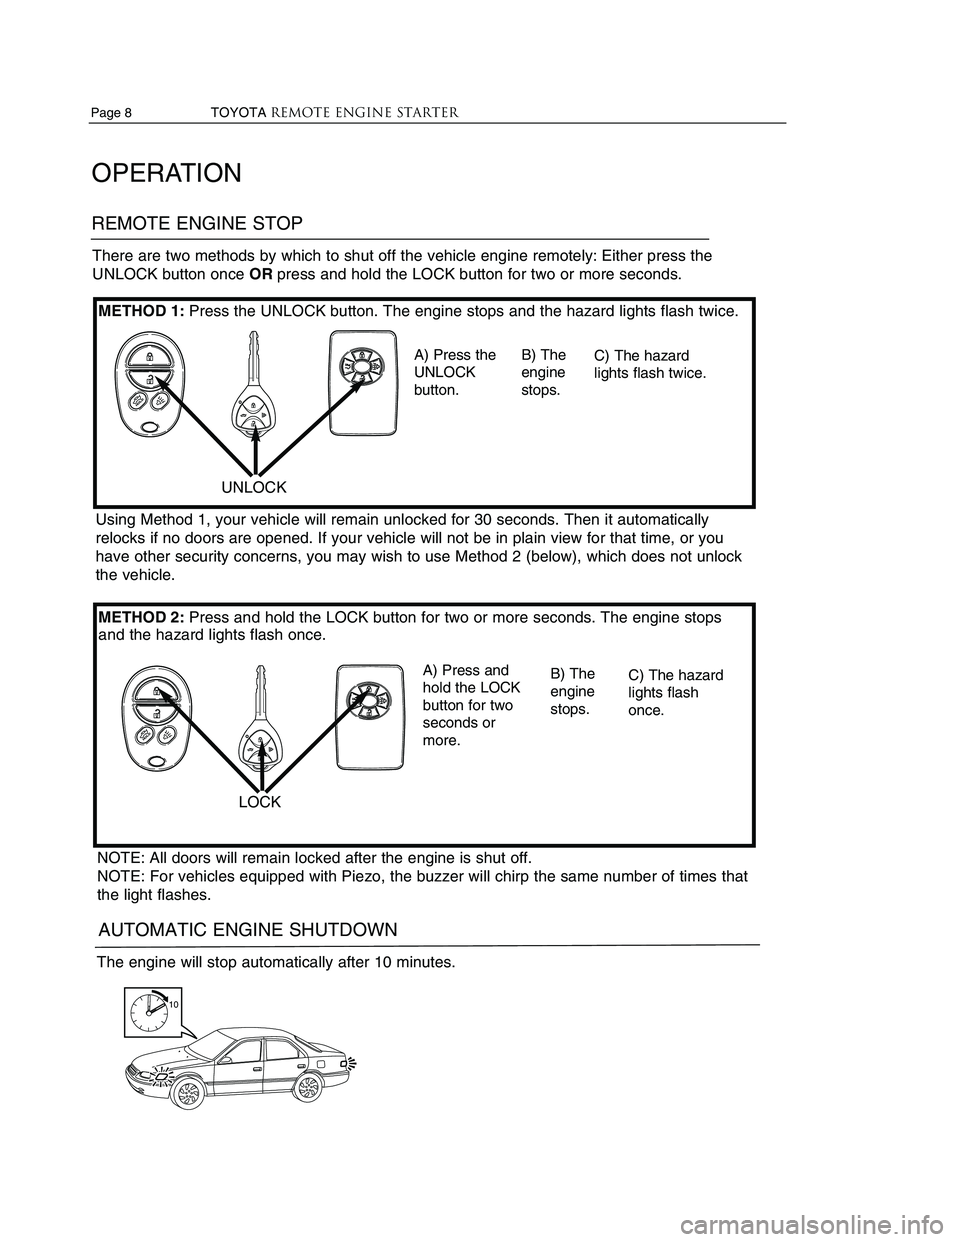 TOYOTA VENZA 2009  Accessories, Audio & Navigation (in English) Page 8                    TOYOTAREMOTE ENGINE STARTERTOYOTAREMOTE ENGINE STARTER Page 5
OPERATION
BEFORE STARTING THE ENGINE
The shift lever is in the “P” position.
(Without Push Start)
The key is